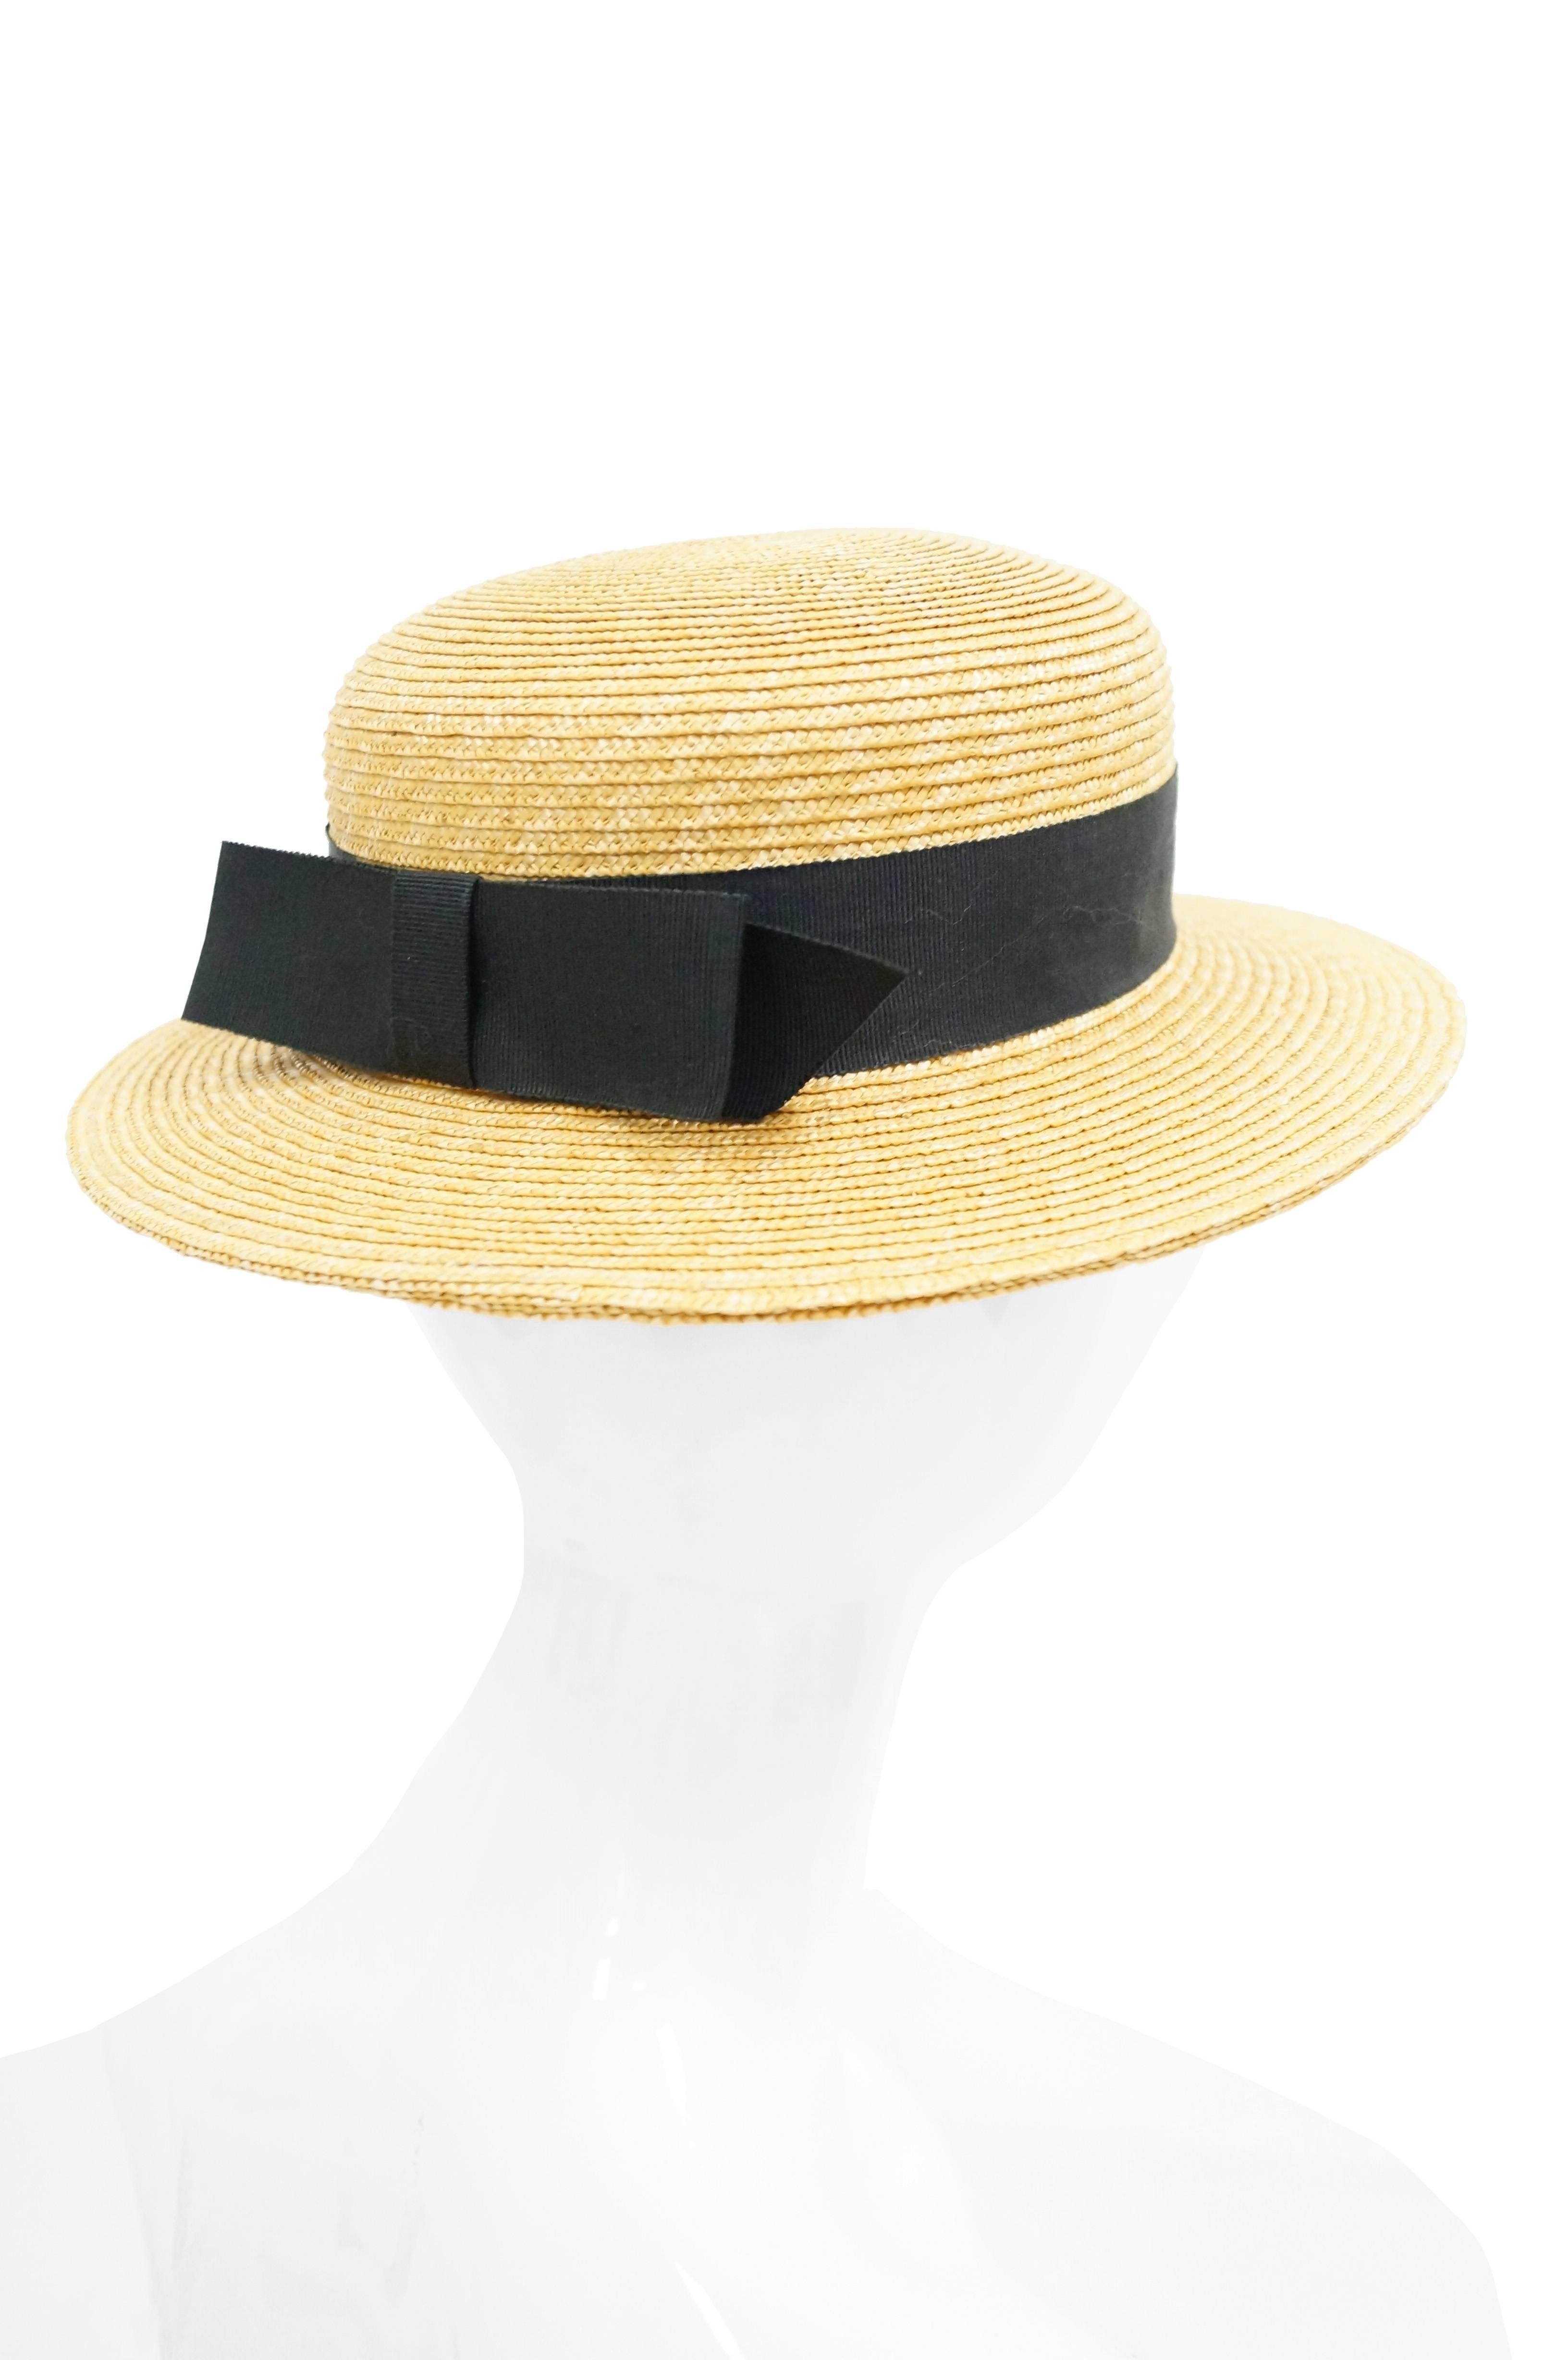 Stay cool in the heat with this vintage YSL hat! The straw hat features a medium - size flat brim and tall, rounded crown. The hat is reminiscent of a boater hat, with its wide black grosgrain ribbon, ending in a bow at the back. Interior of hat has